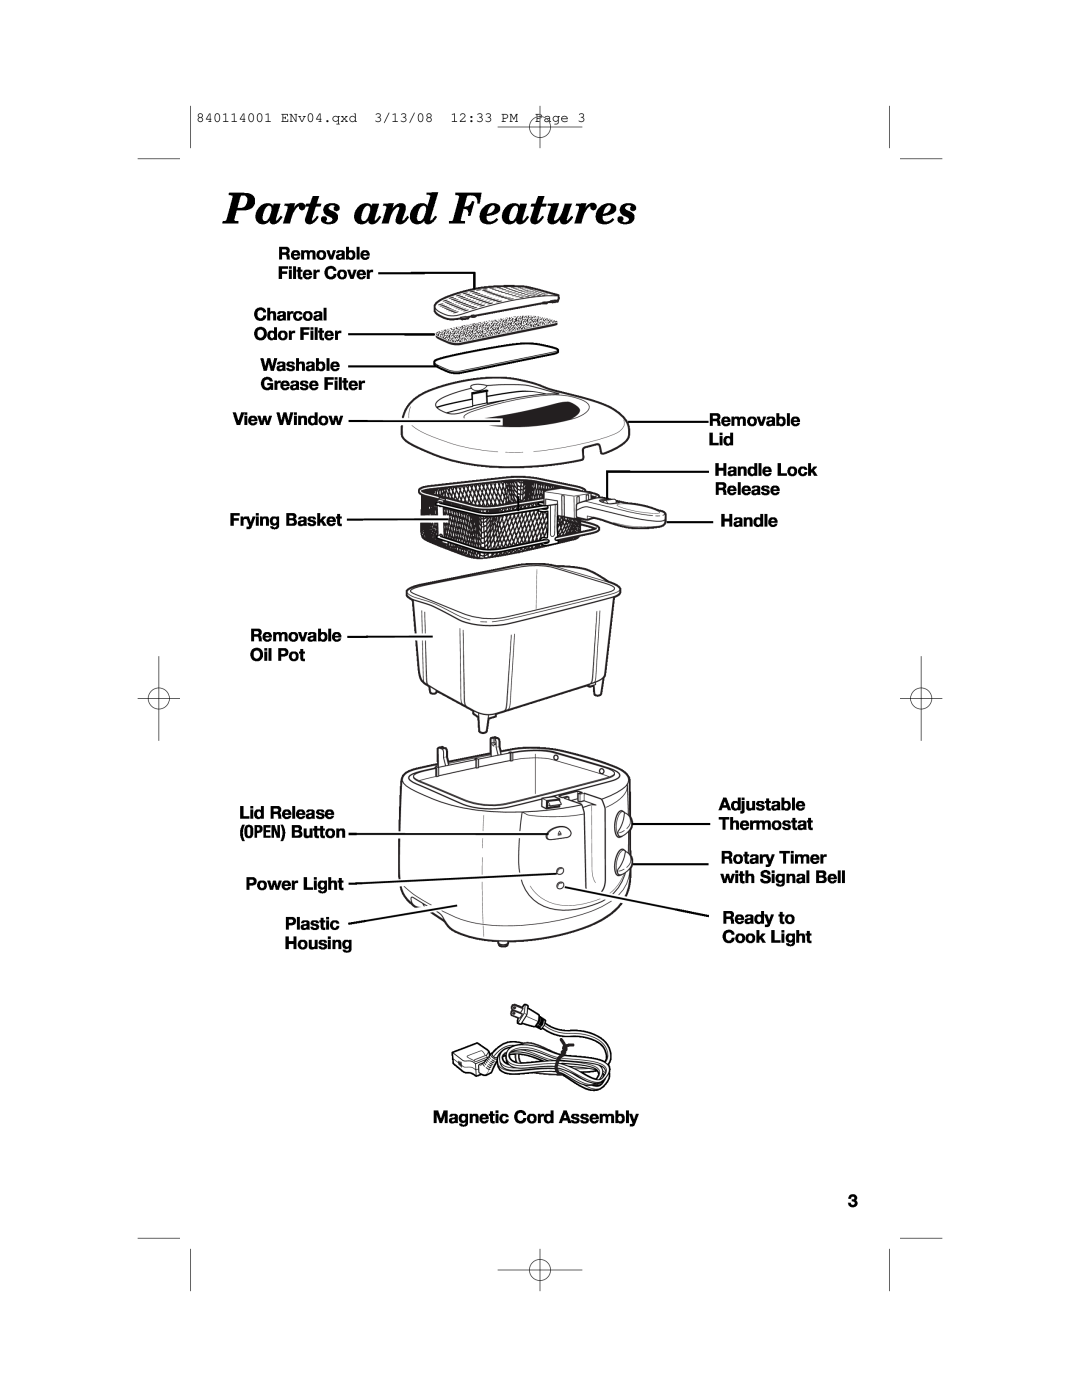 Hamilton Beach 840114001 manual Parts and Features 